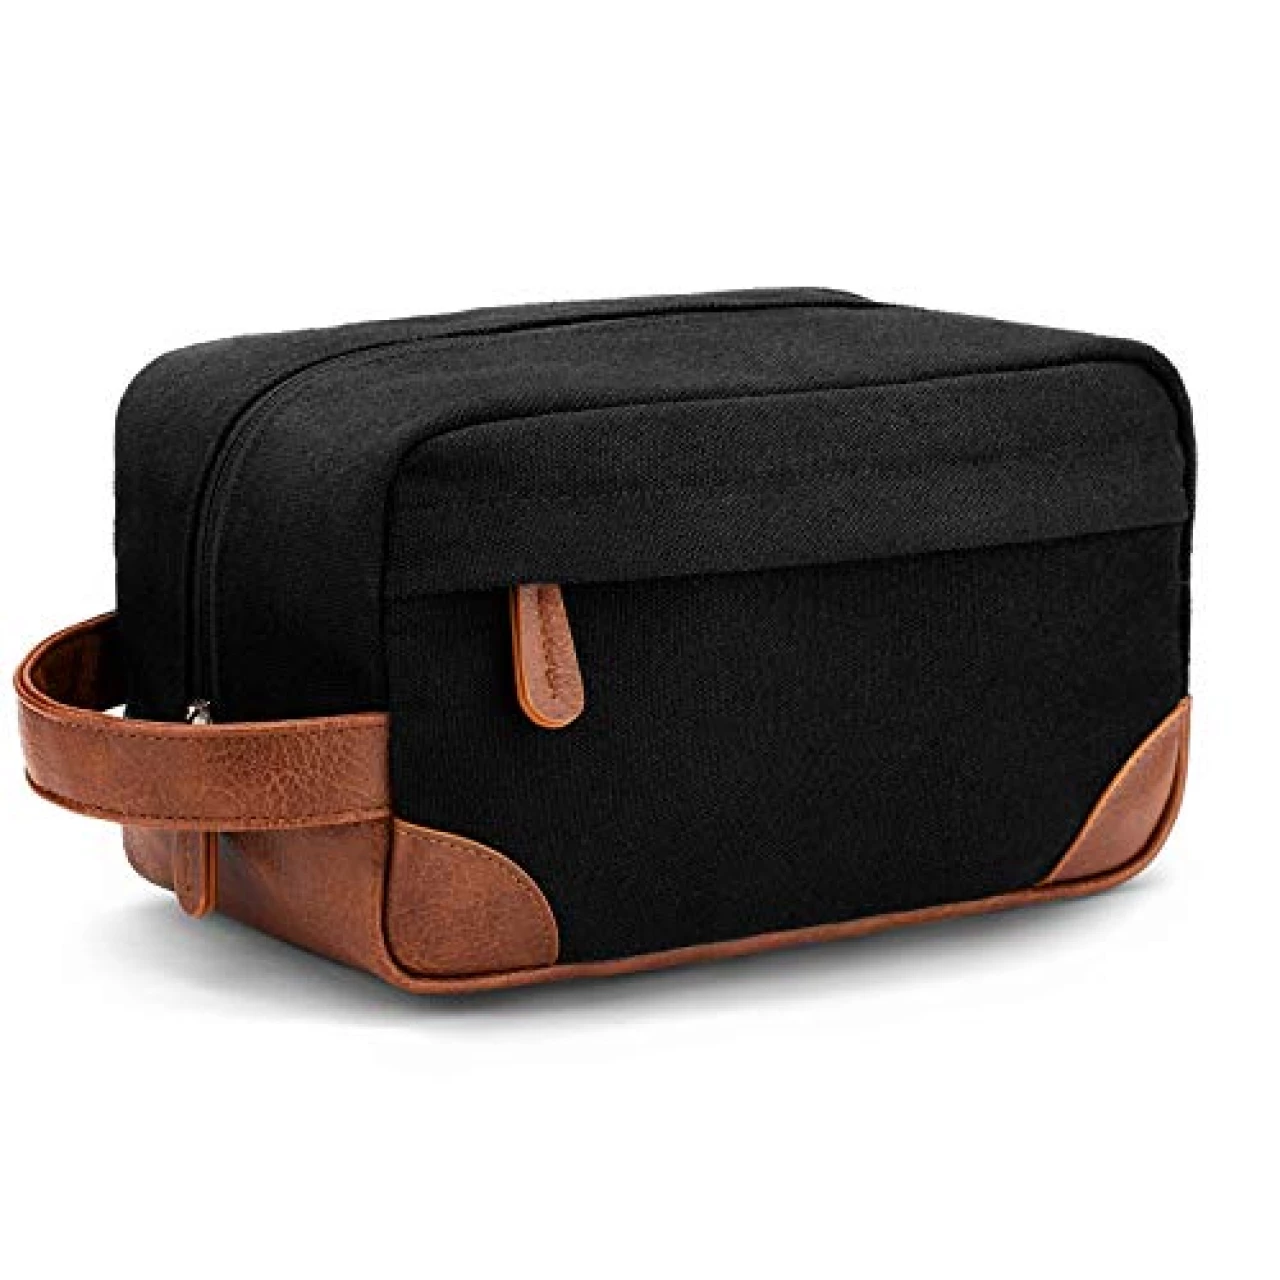 Vorspack Toiletry Bag Hanging Dopp Kit for Men Water Resistant Canvas Shaving Bag with Large Capacity